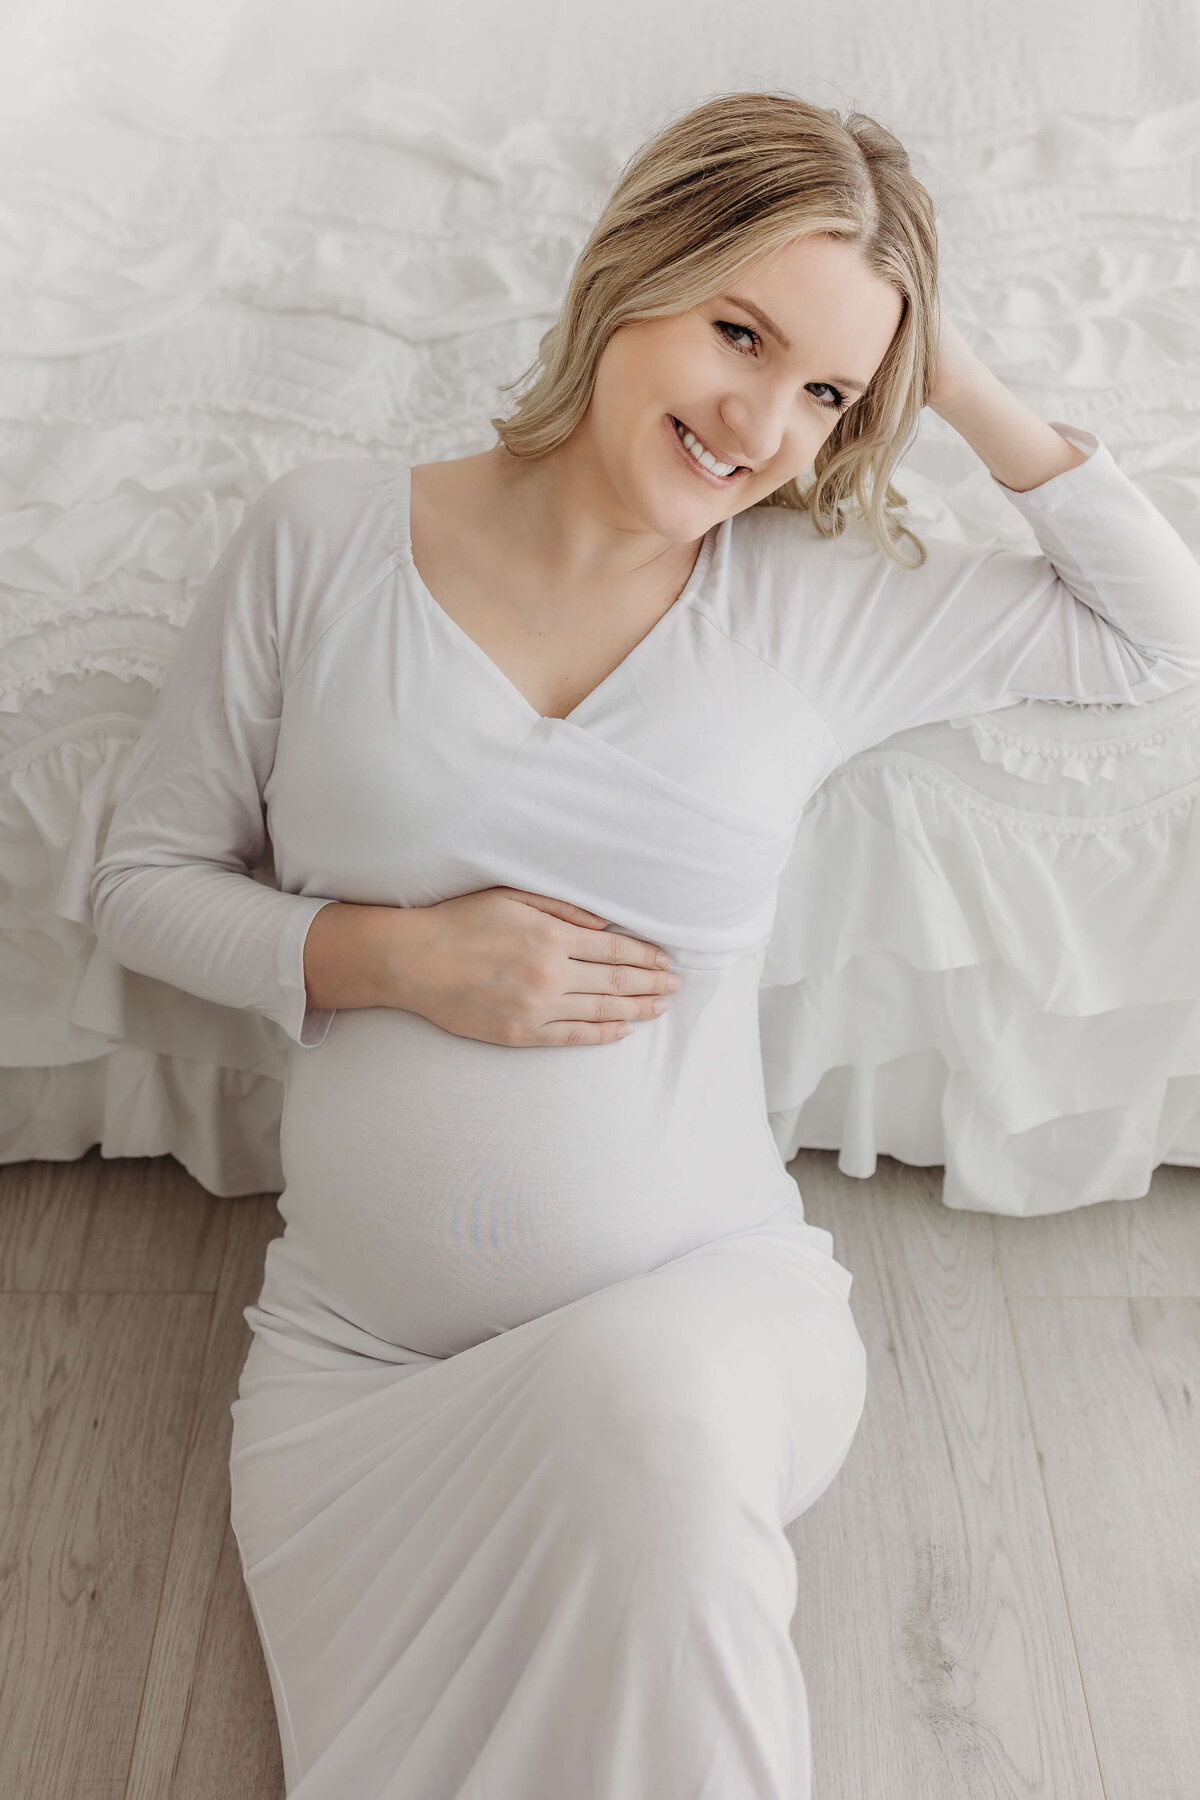 Happy woman expecting baby in all white dress near Eau Claire, WI